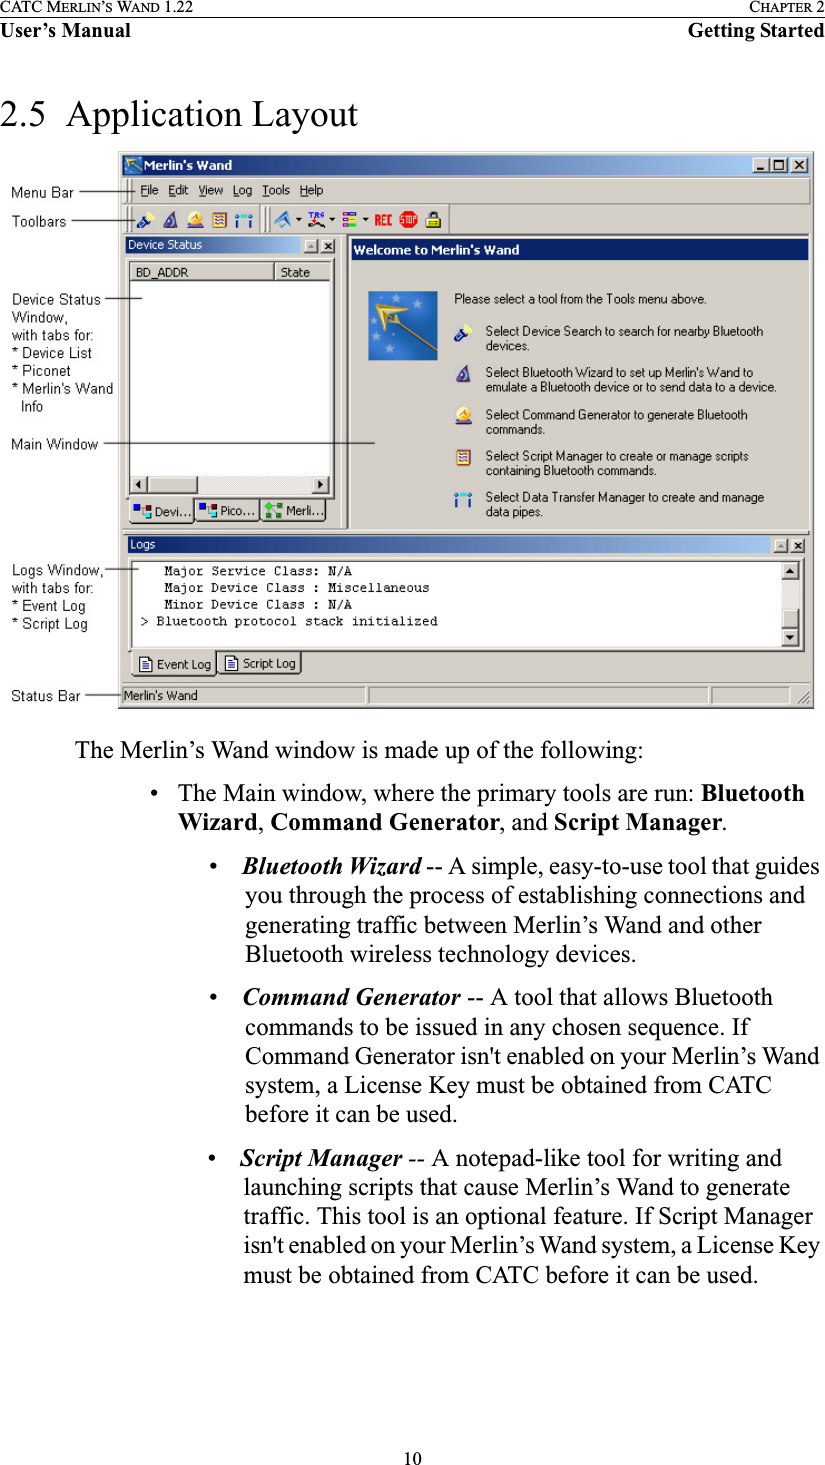 10CATC MERLIN’S WAND 1.22 CHAPTER 2User’s Manual Getting Started2.5  Application LayoutThe Merlin’s Wand window is made up of the following:• The Main window, where the primary tools are run: Bluetooth Wizard, Command Generator, and Script Manager.    •Bluetooth Wizard -- A simple, easy-to-use tool that guides you through the process of establishing connections and generating traffic between Merlin’s Wand and other Bluetooth wireless technology devices.•Command Generator -- A tool that allows Bluetooth commands to be issued in any chosen sequence. If Command Generator isn&apos;t enabled on your Merlin’s Wand system, a License Key must be obtained from CATC before it can be used.•Script Manager -- A notepad-like tool for writing and launching scripts that cause Merlin’s Wand to generate traffic. This tool is an optional feature. If Script Manager isn&apos;t enabled on your Merlin’s Wand system, a License Key must be obtained from CATC before it can be used.